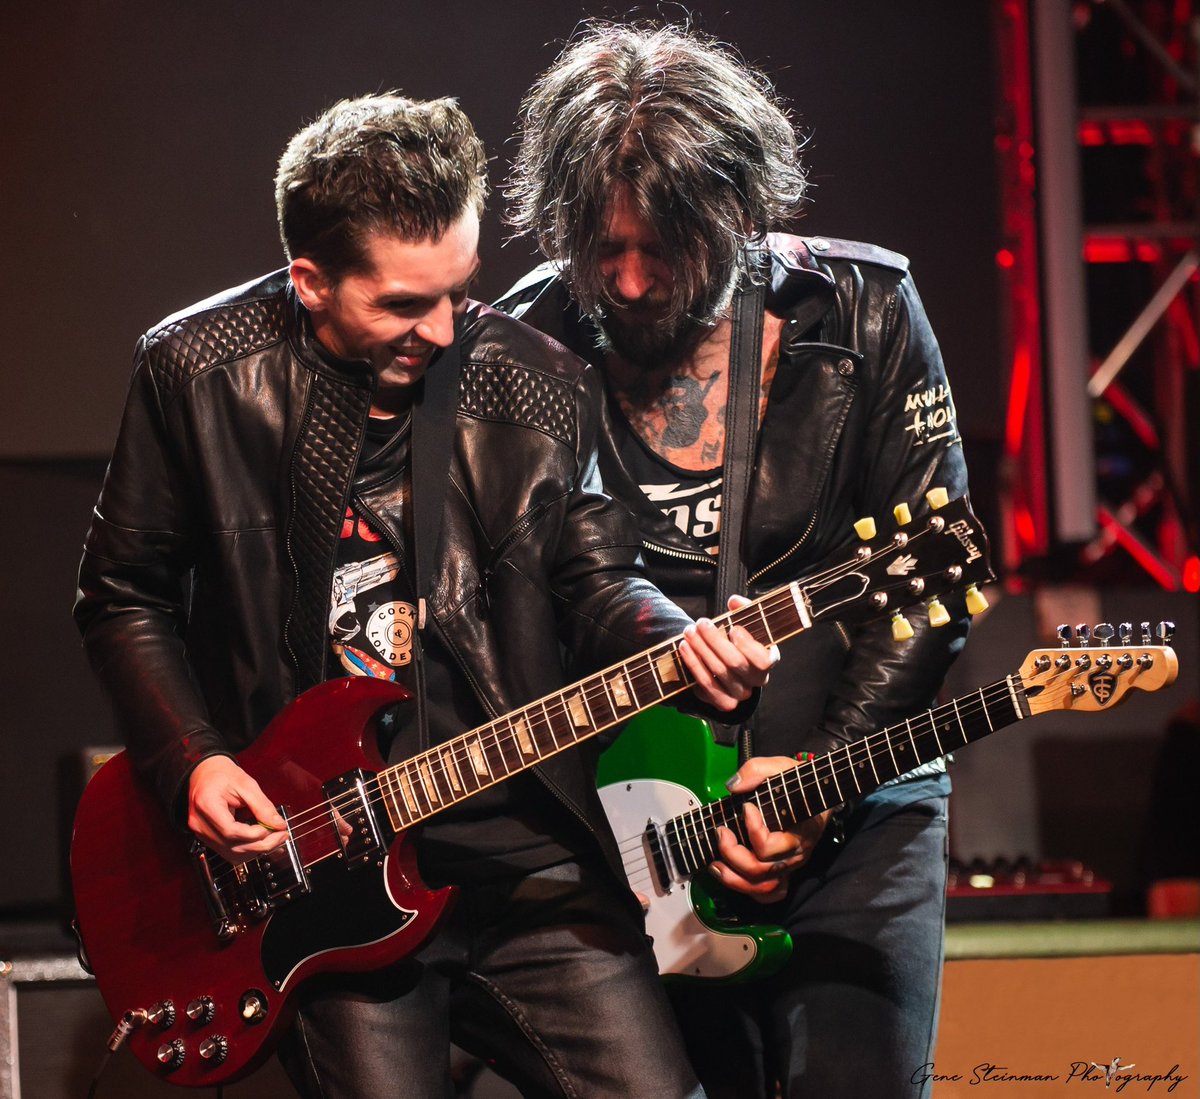 Just received these awesome photos of @petedank & @TraciiGuns playing at The Vixen in McHenry, IL 🎸🔥🎸🔥🎸 📸 Gene Steinman